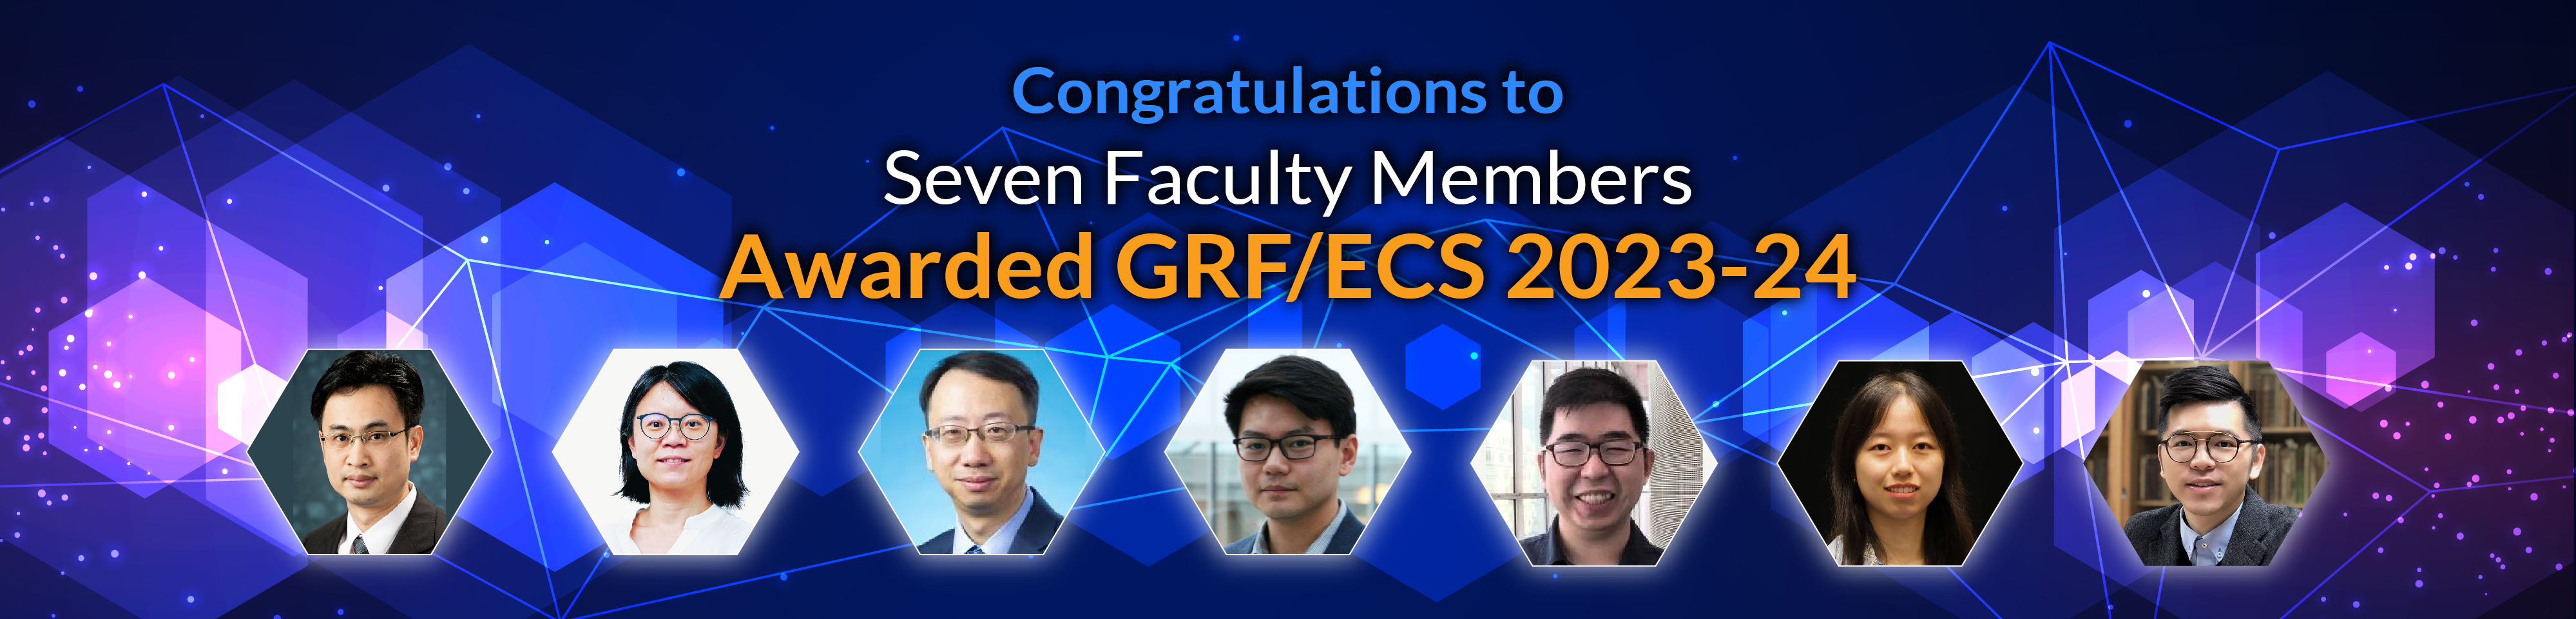 Congratulations to Seven Faculty Members from the School of Data Science Awarded GRF/ECS 2023-24